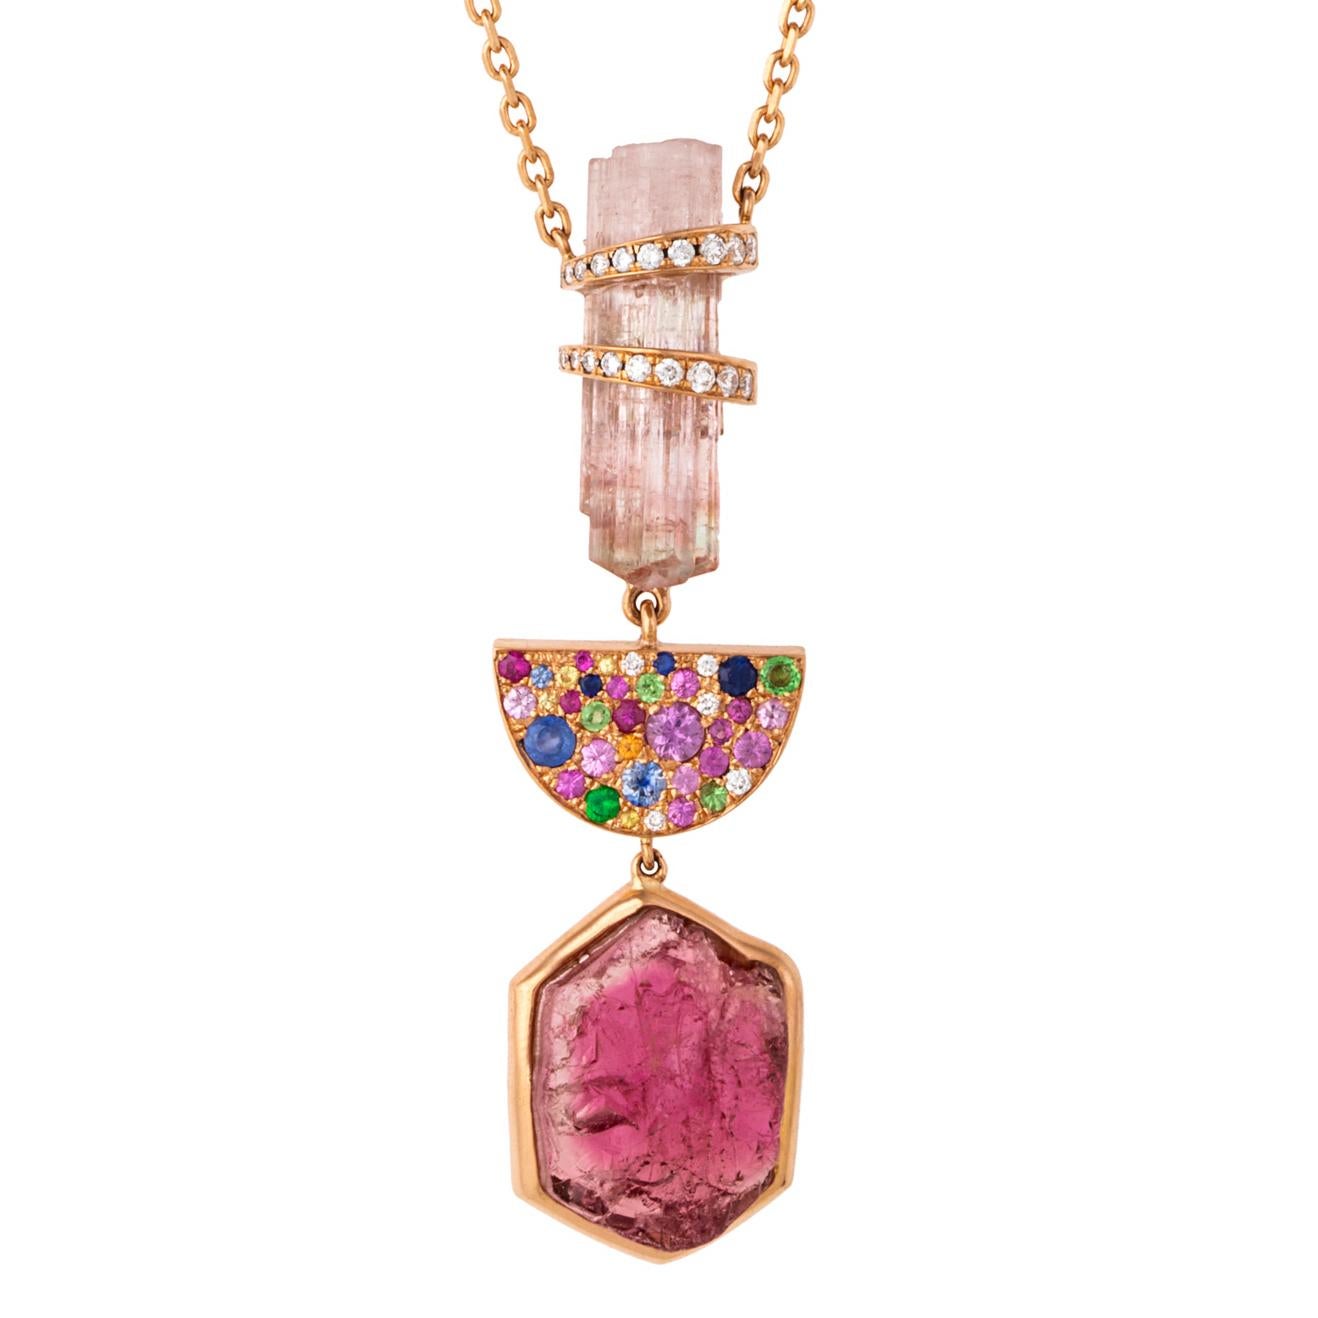 Brilliant Cut 18k Rose Gold Necklace with Tourmaline, Amethysts, Sapphires and Diamonds For Sale